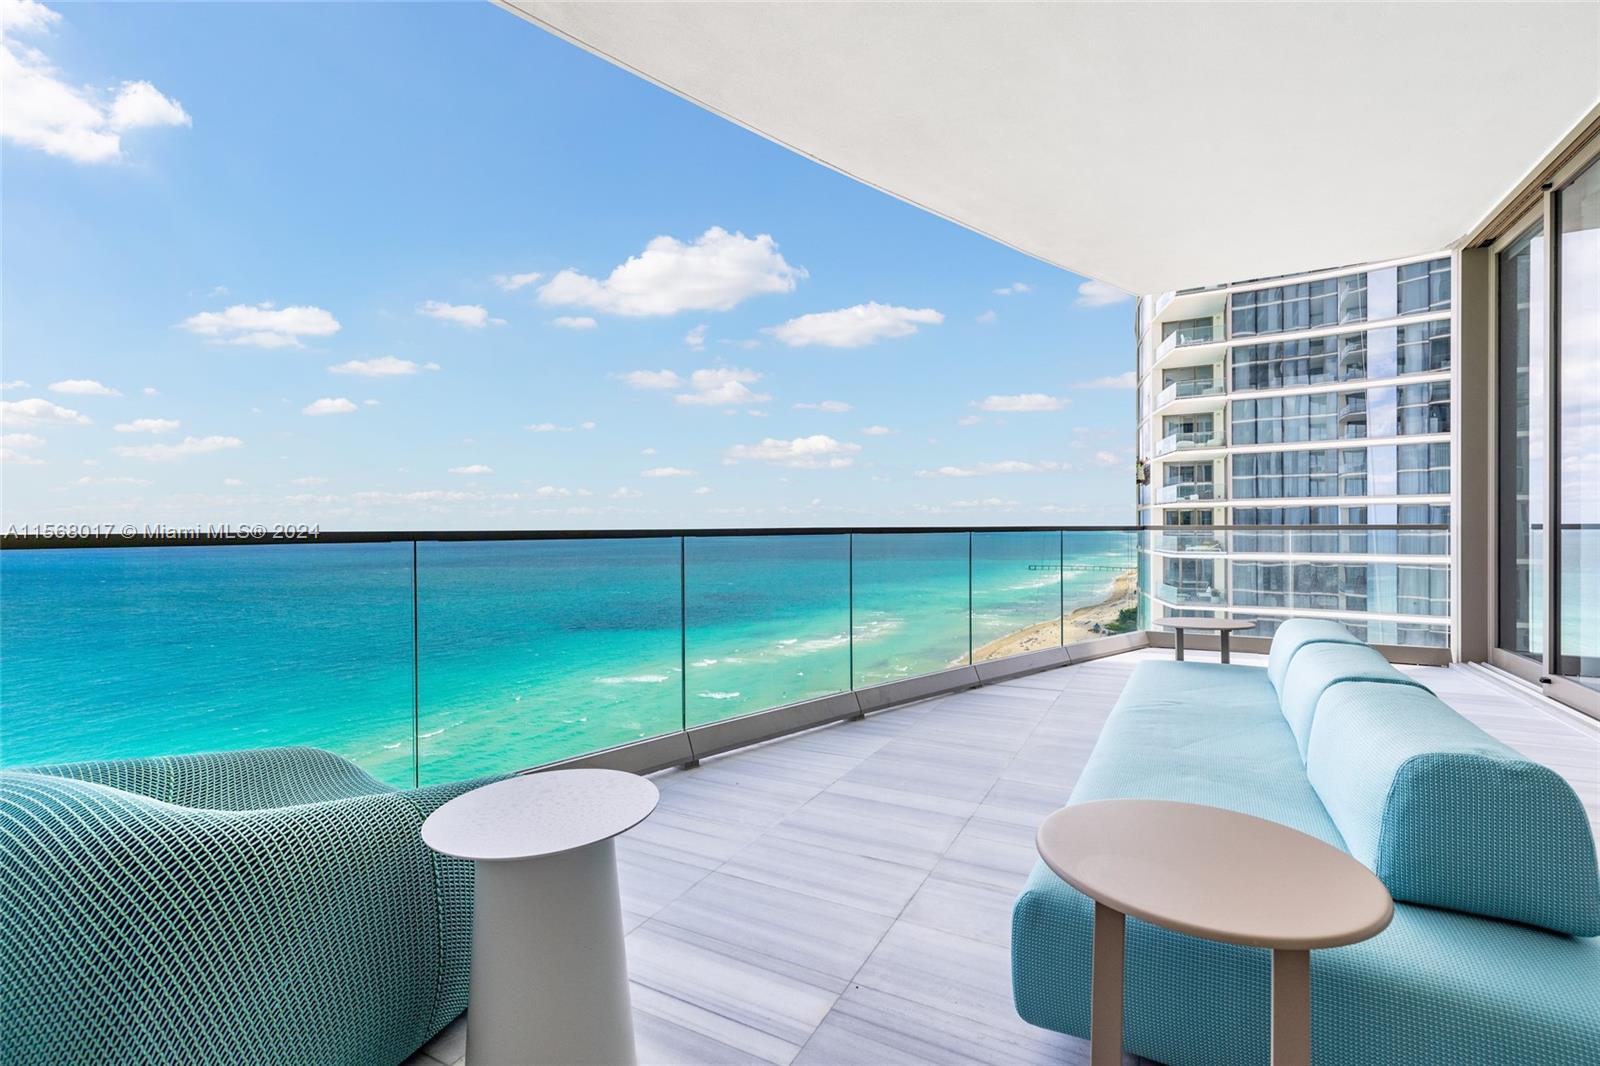 Experience the pinnacle of luxury living at Estates at Acqualina. This opulent unit boasts over $2.5